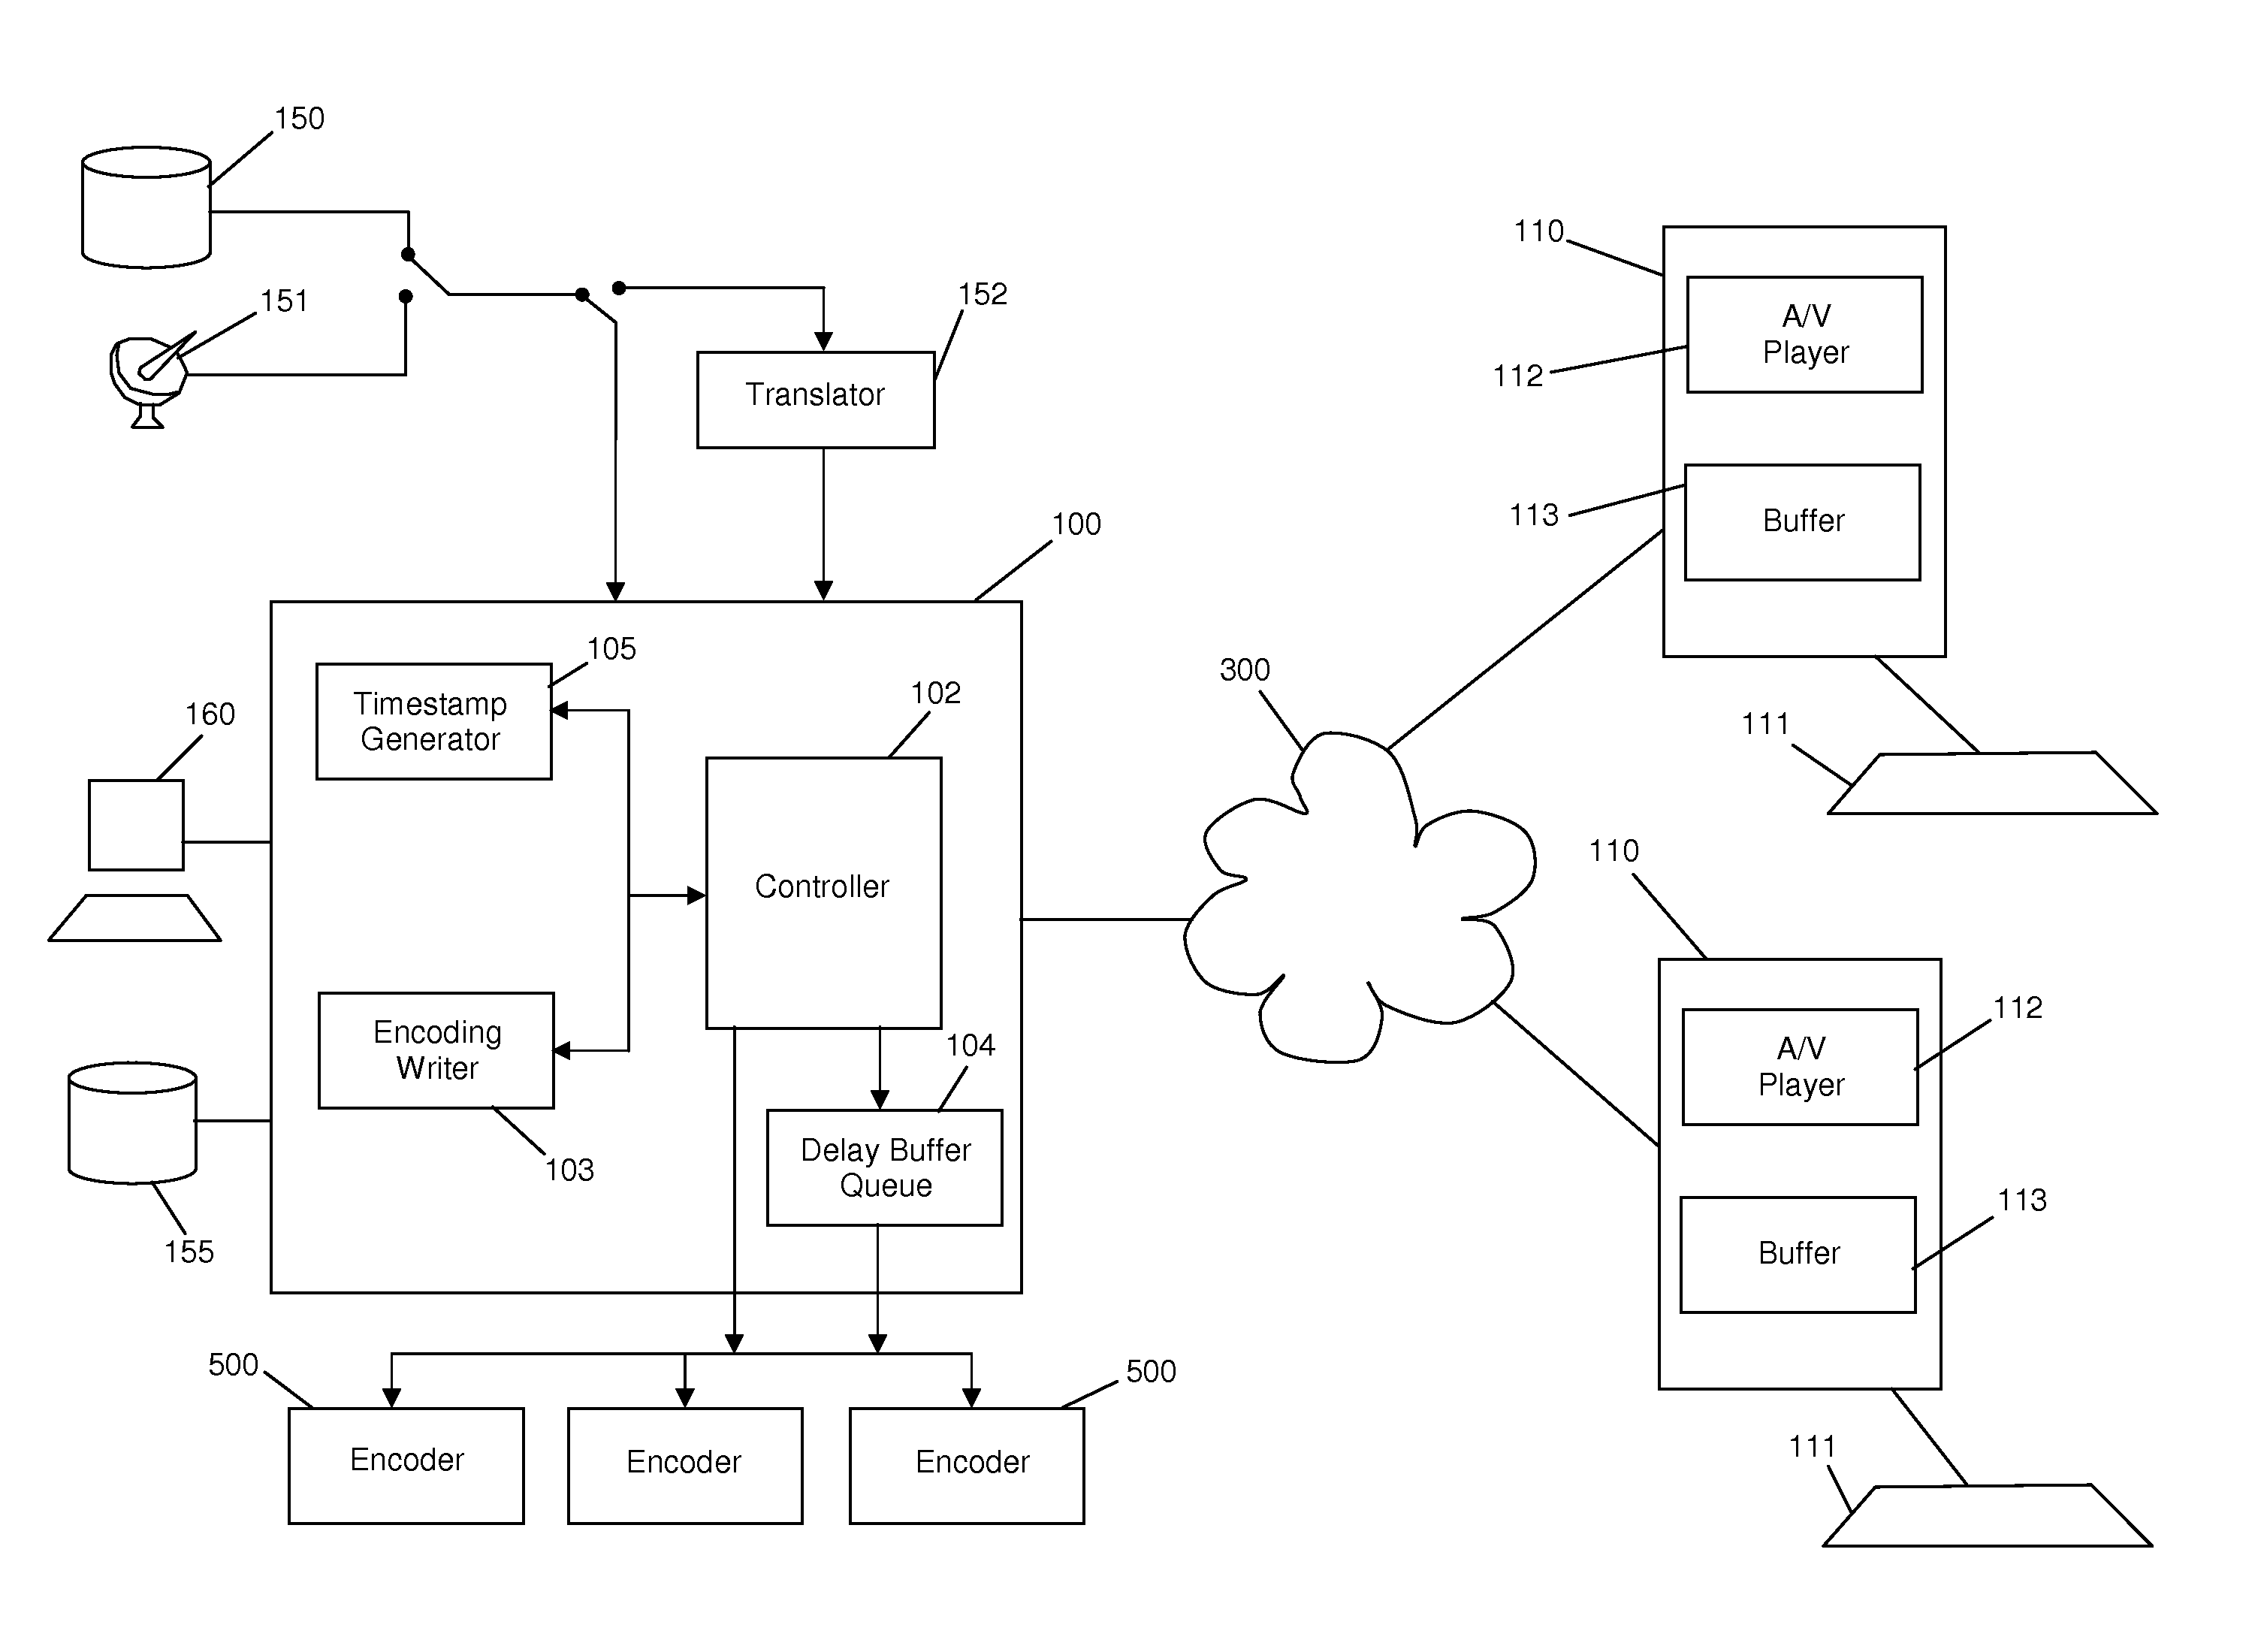 Multi-lingual transmission and delay of closed caption content through a delivery system